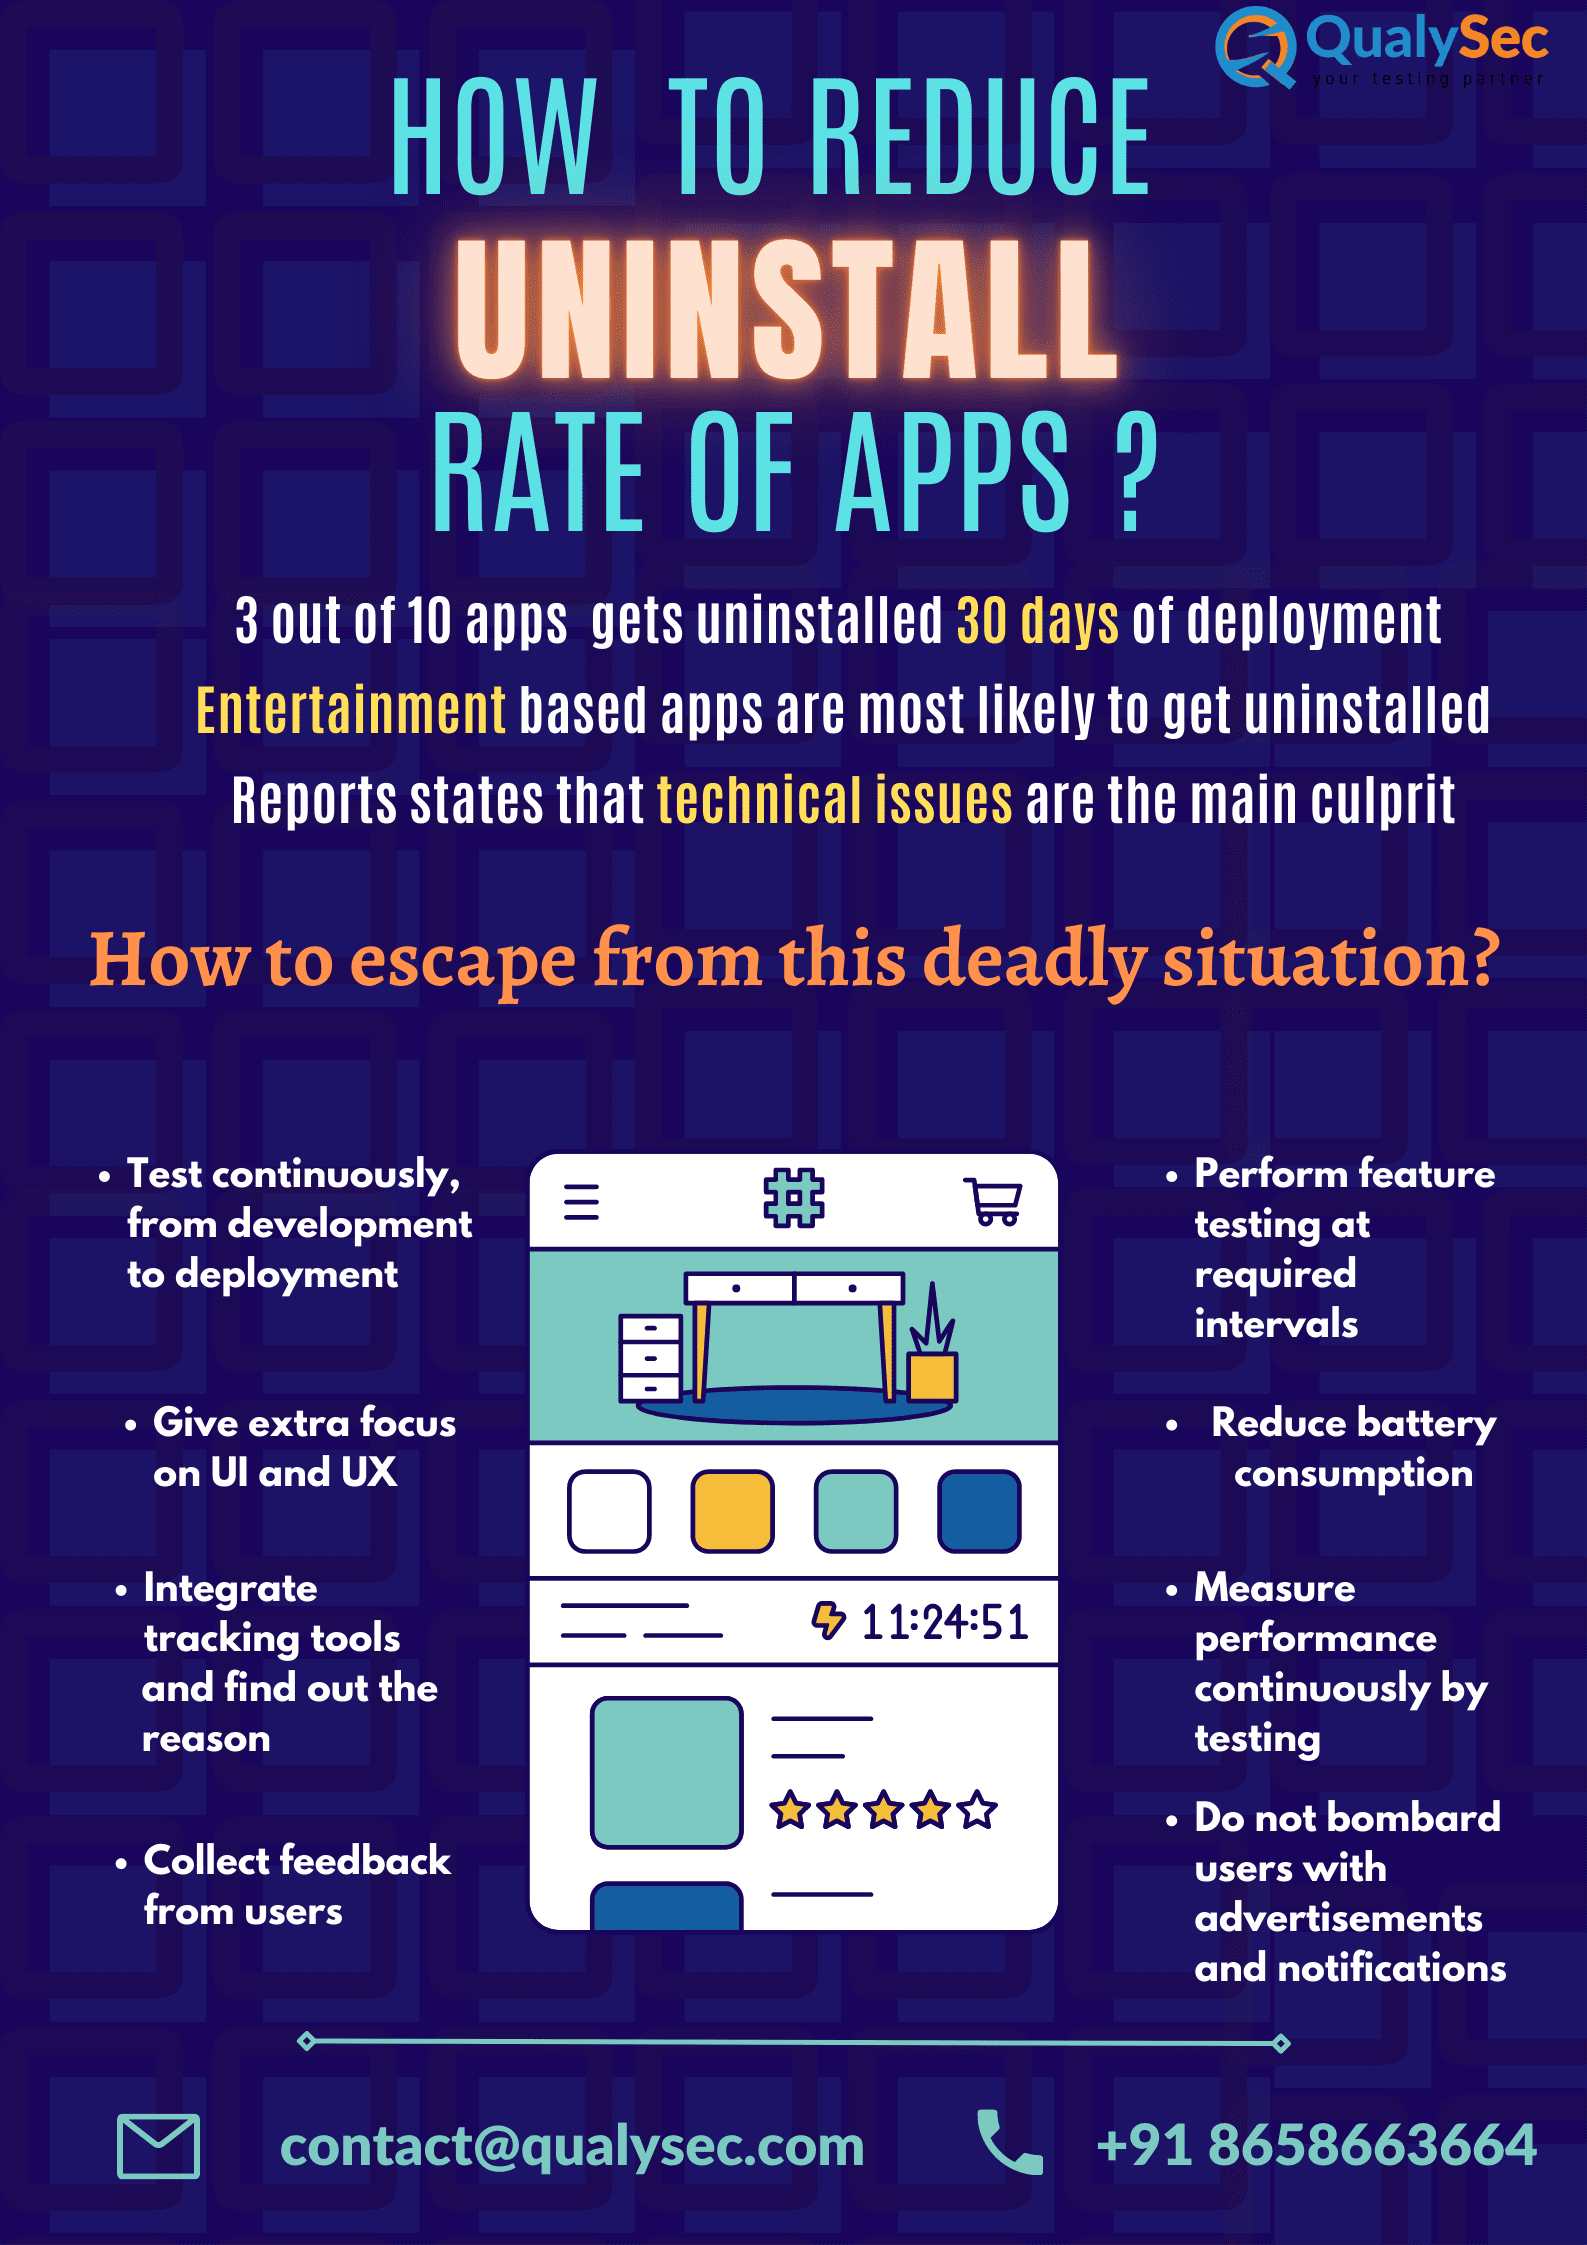 How to reduce uninstall rate of apps?